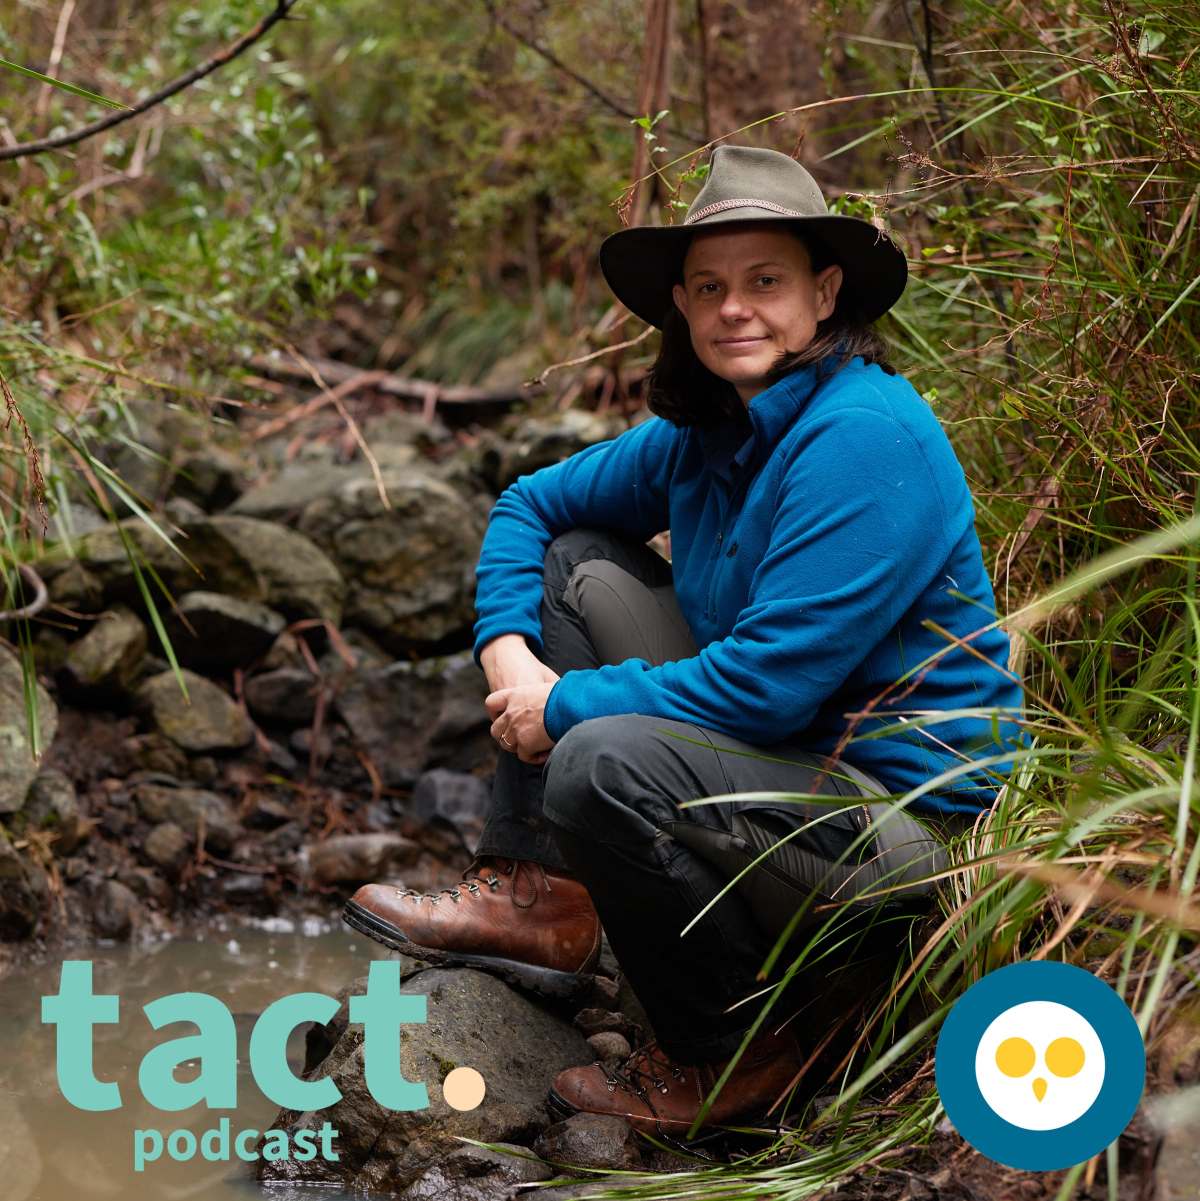 Alone Australia's Kate Grarock sitting beside a stream in the bush smiling at the camera, with The Owl and TACT logos